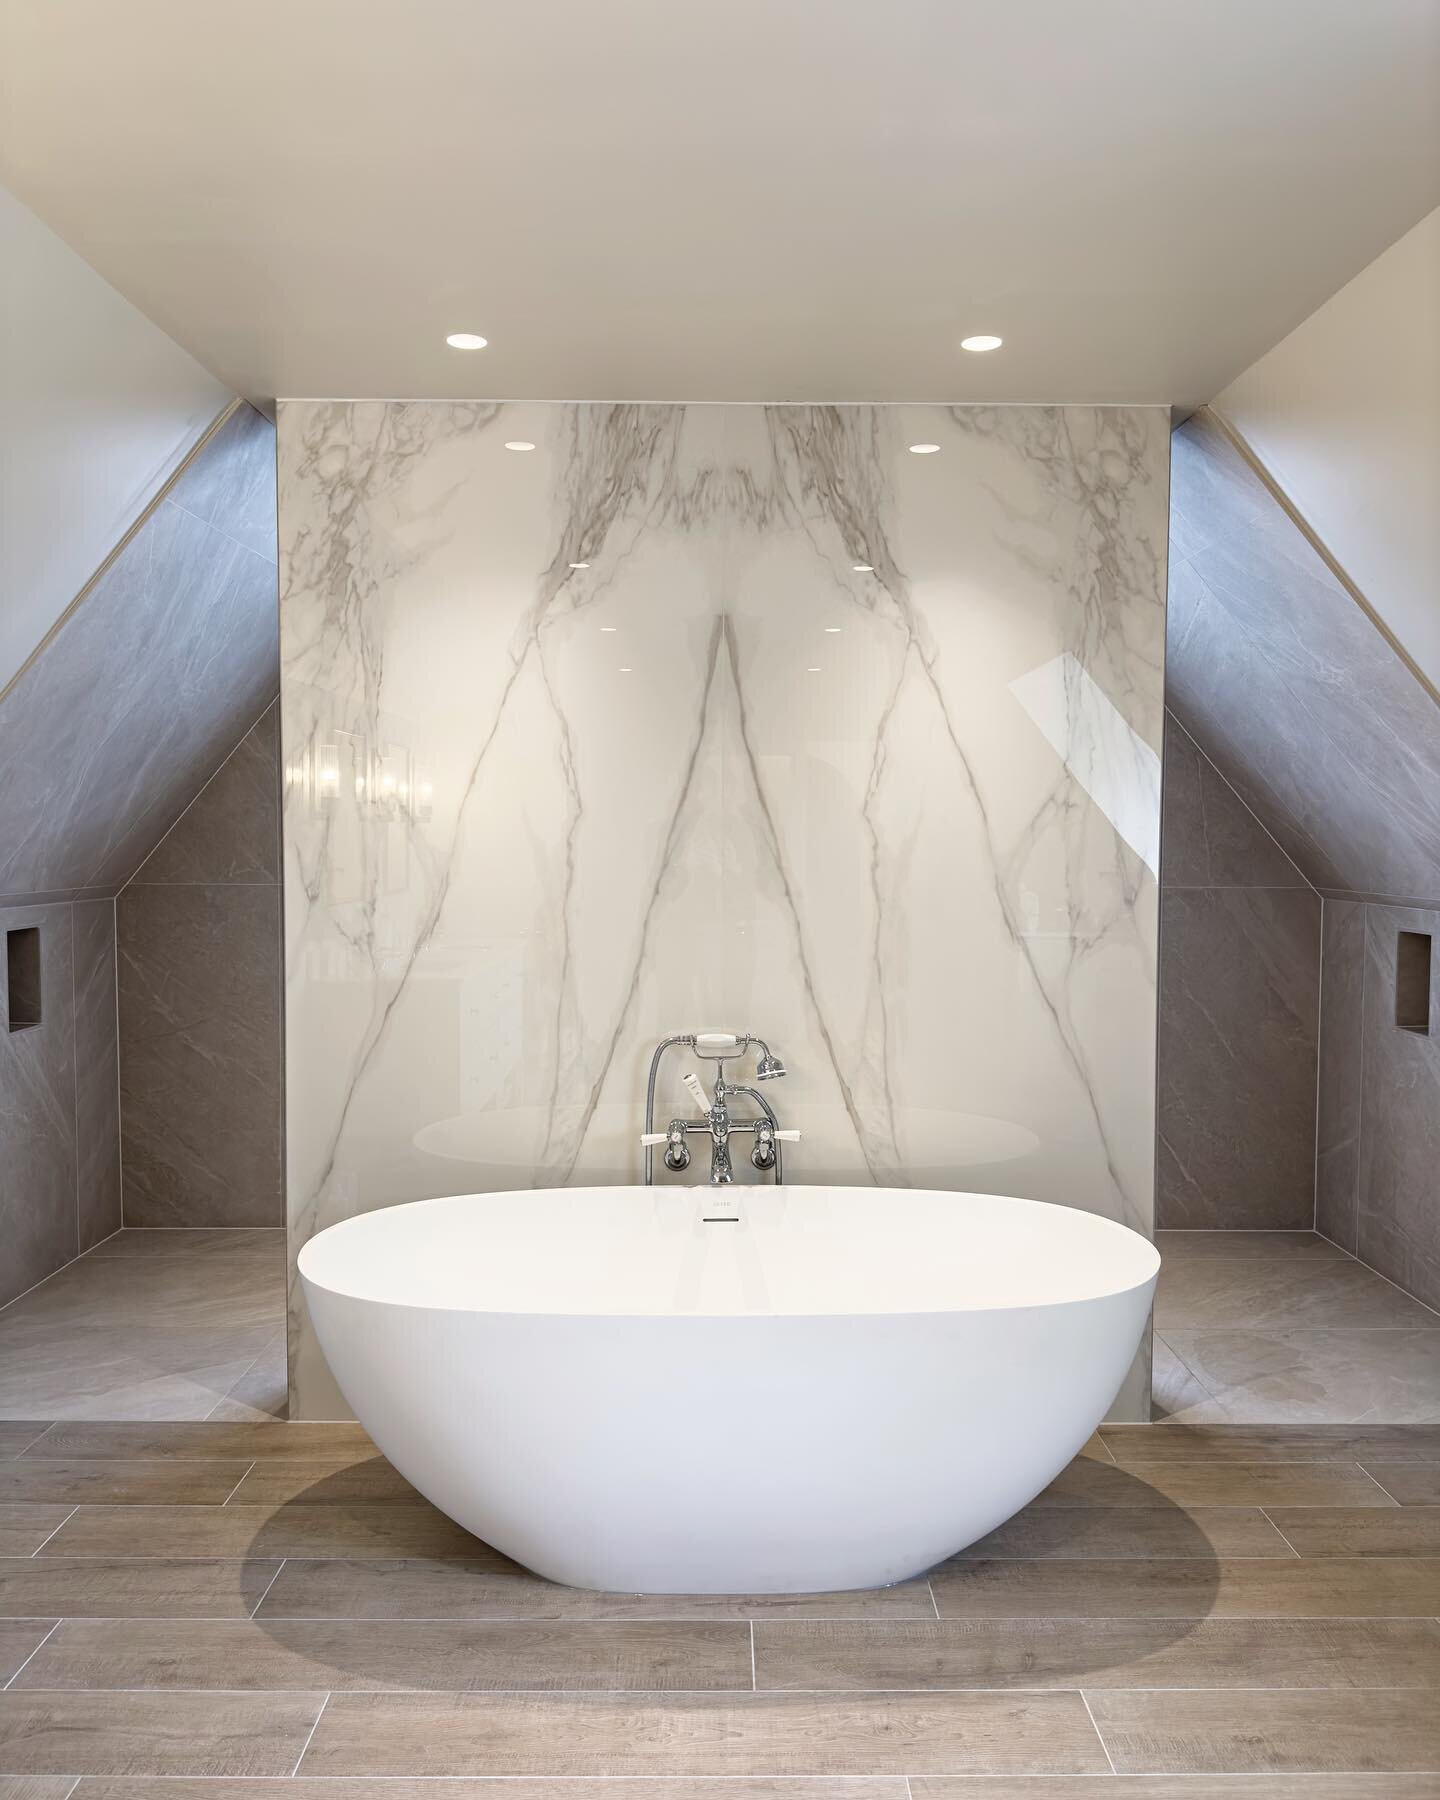 The bath and walk In shower end of the master en-suite at our Manor House project. This project is one of our larger property remodels that we have completely gutted and restructured throughout. Now nearing completion on all the interior spaces. 
.
.